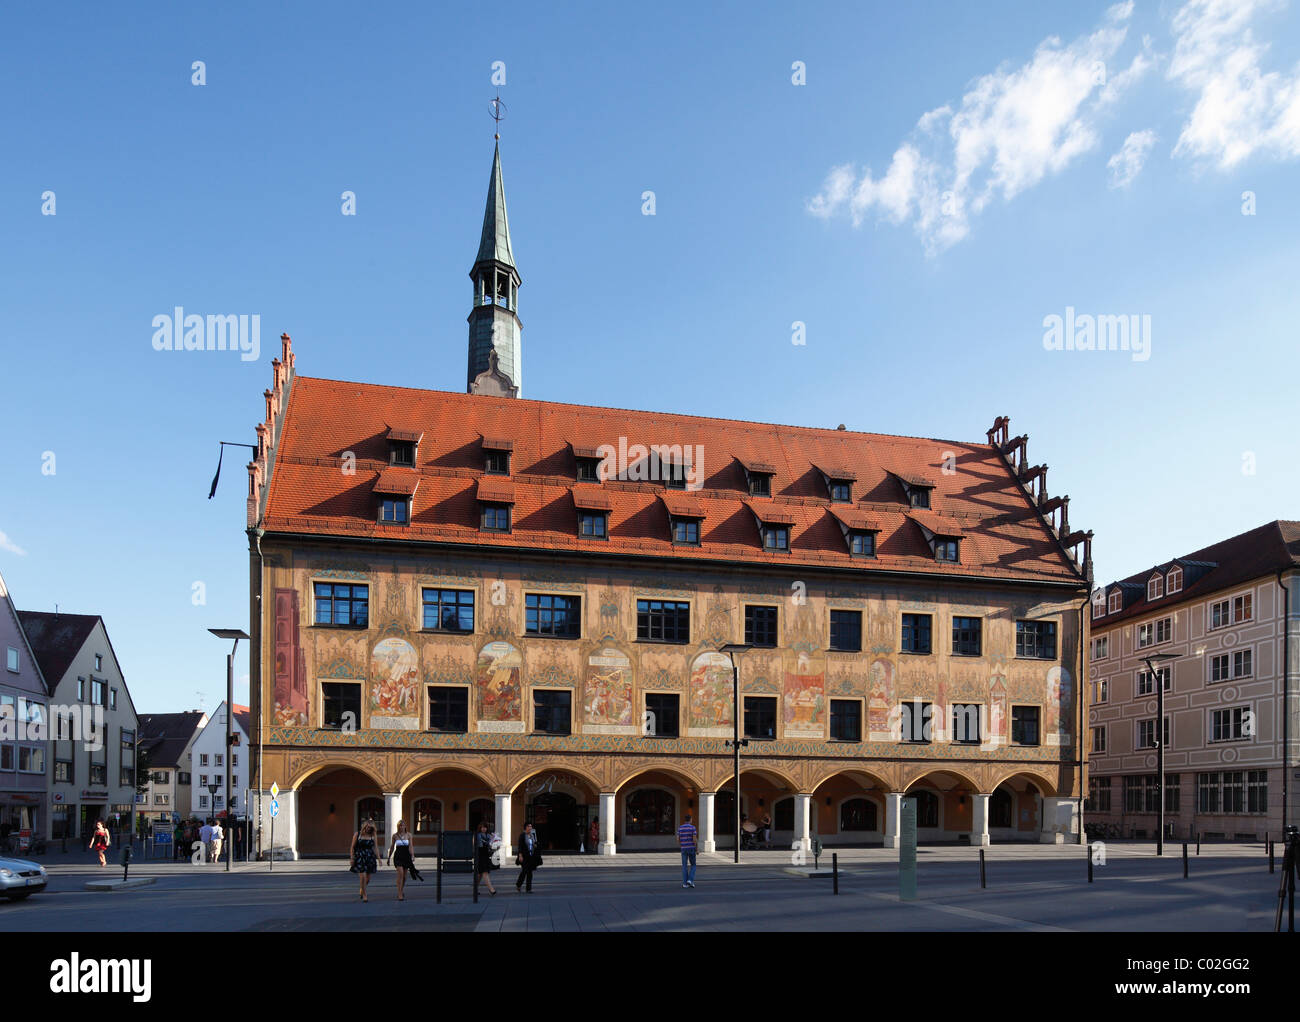 Mairie, Ulm, souabe, Bade-Wurtemberg, Allemagne, Europe Banque D'Images